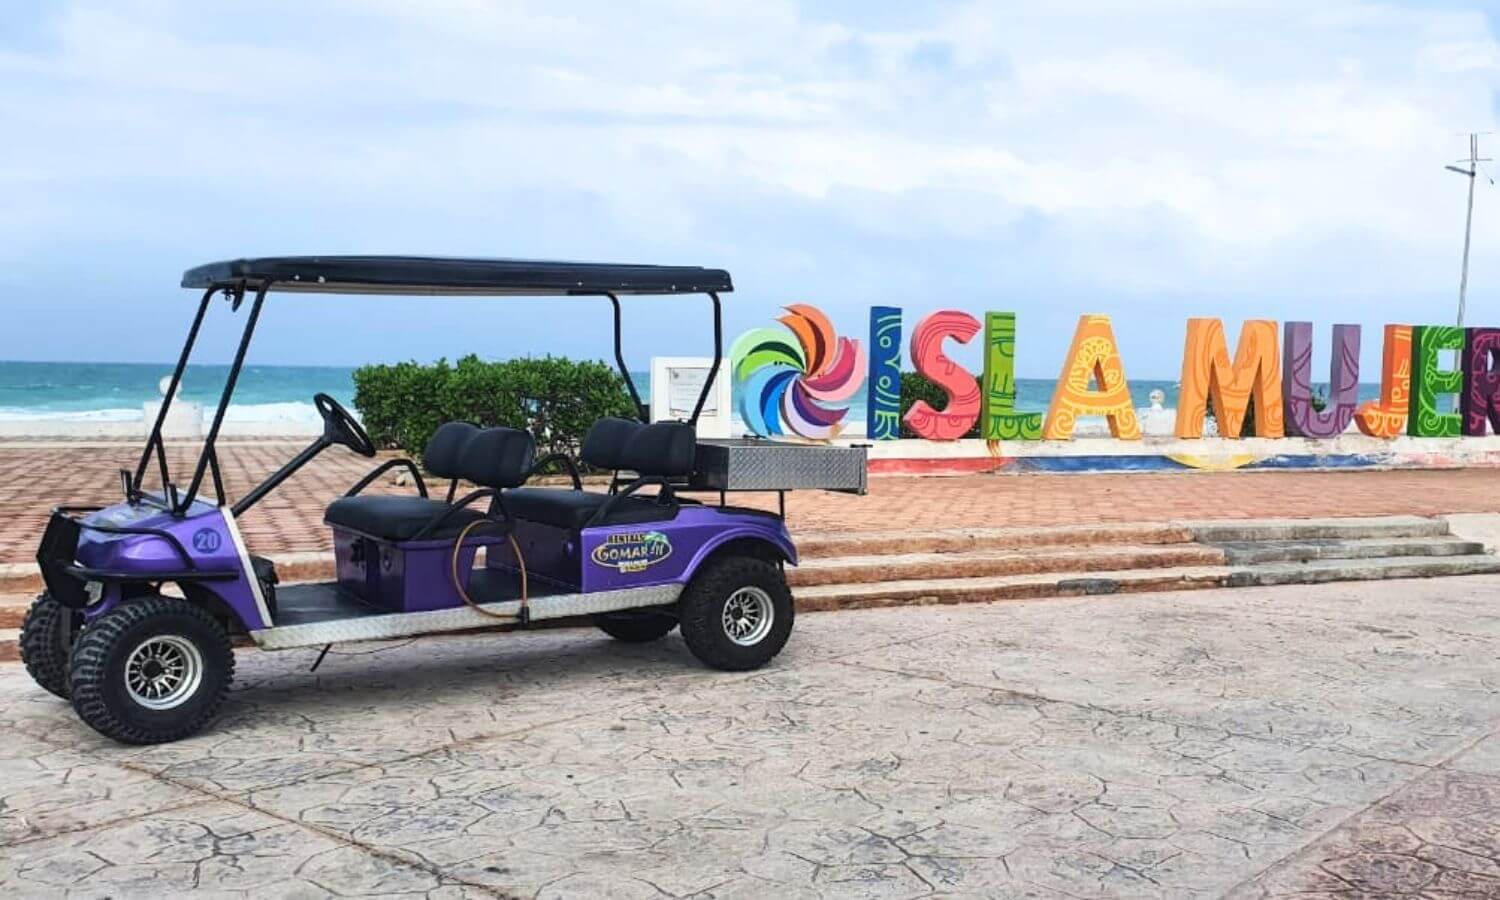 A Gomar II Golf Cart in front of the Isla Mujeres sign on the malecon.